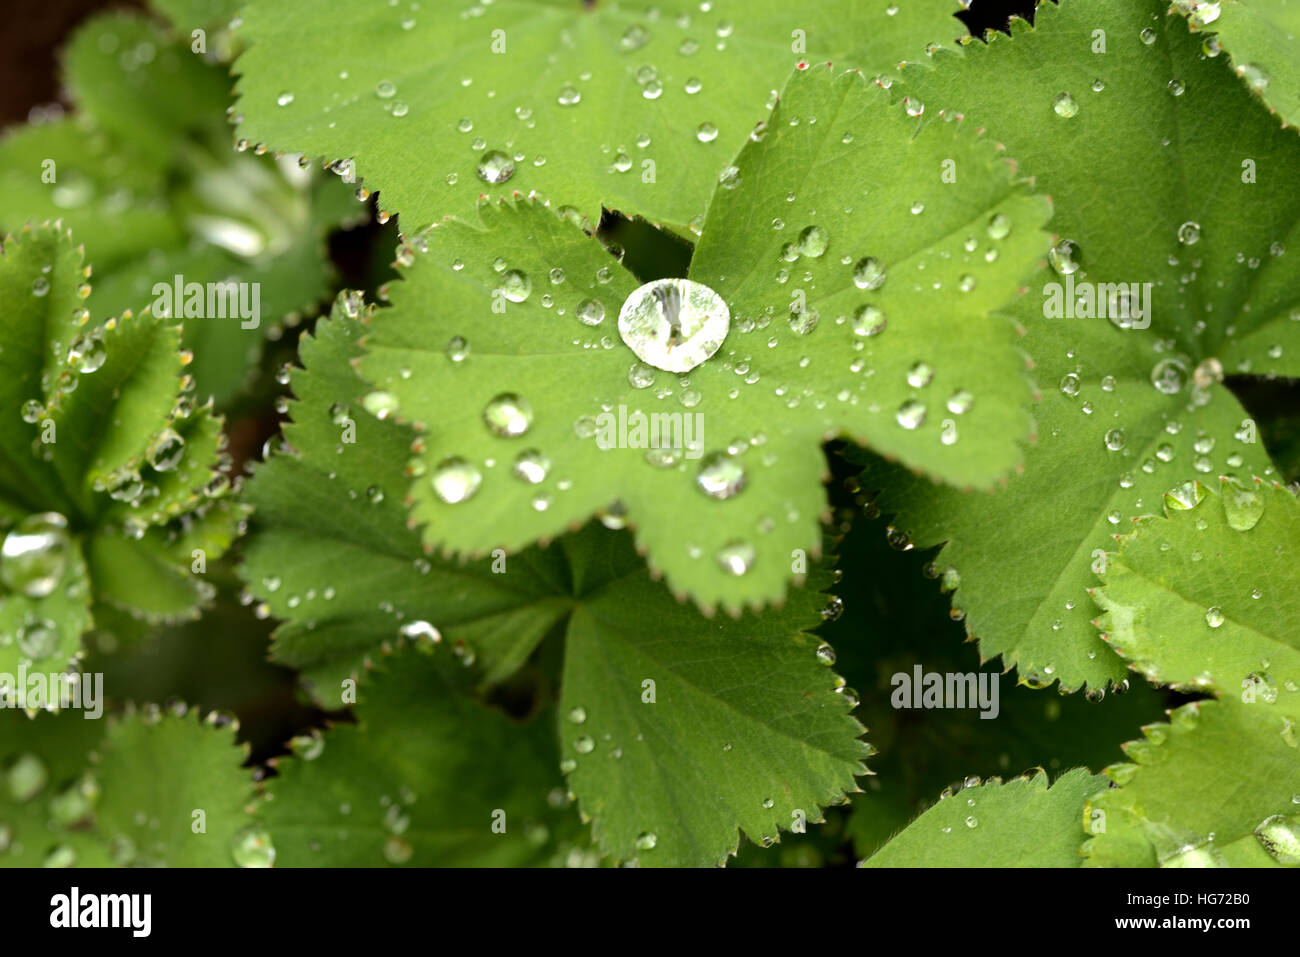 water droplets on green plant leafs. Stock Photo